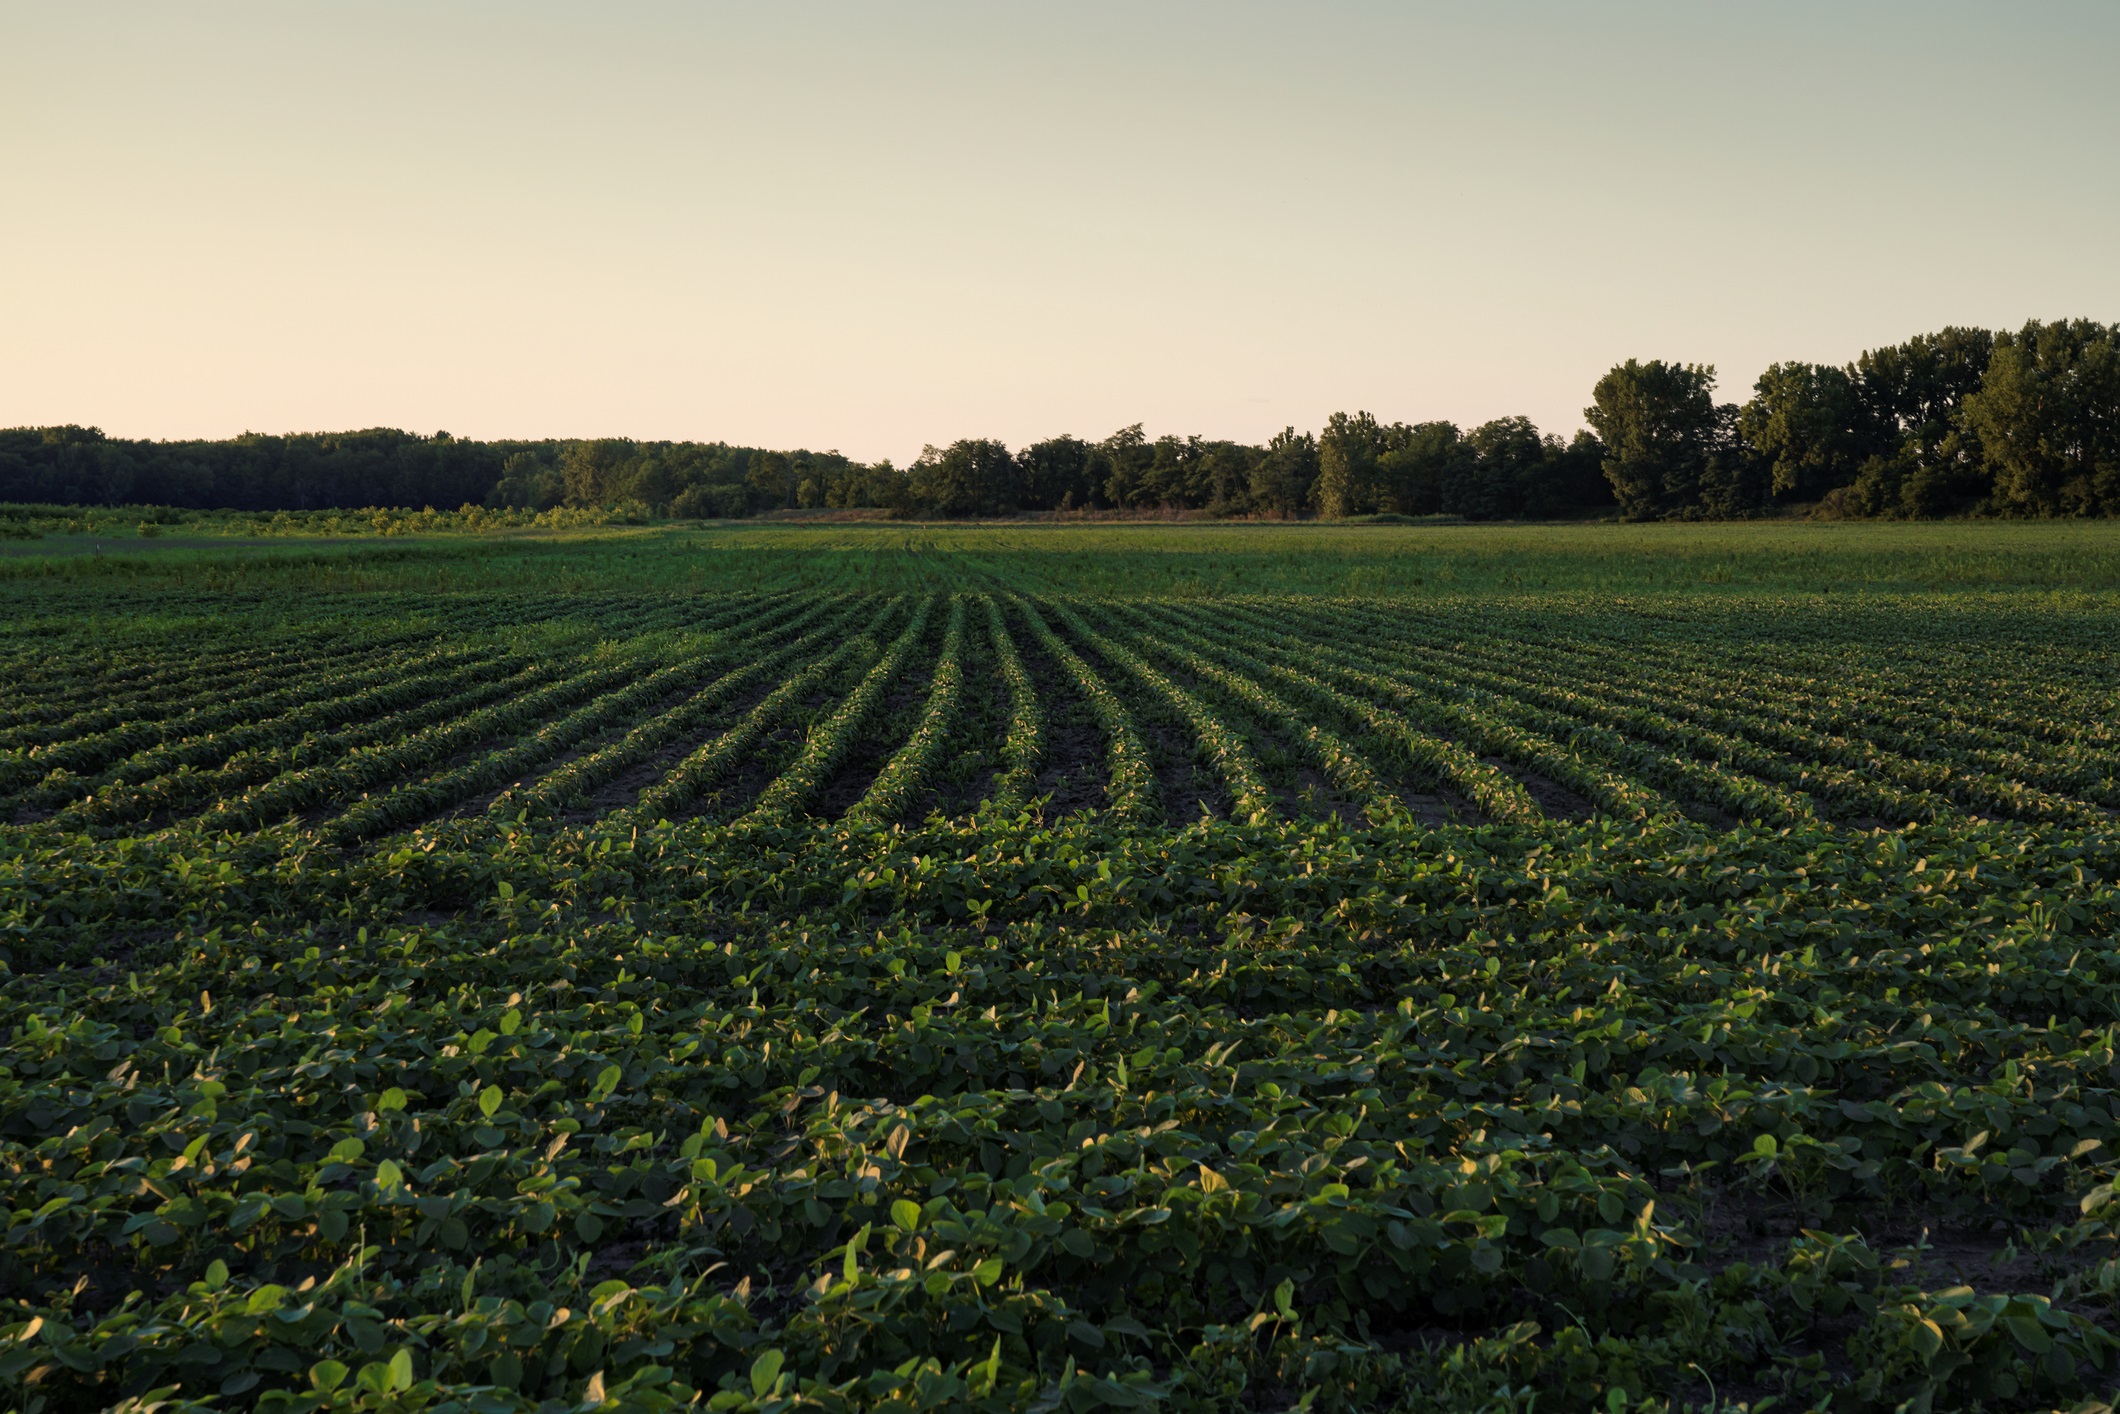 What impact will elevated interest rates have on farmland values?